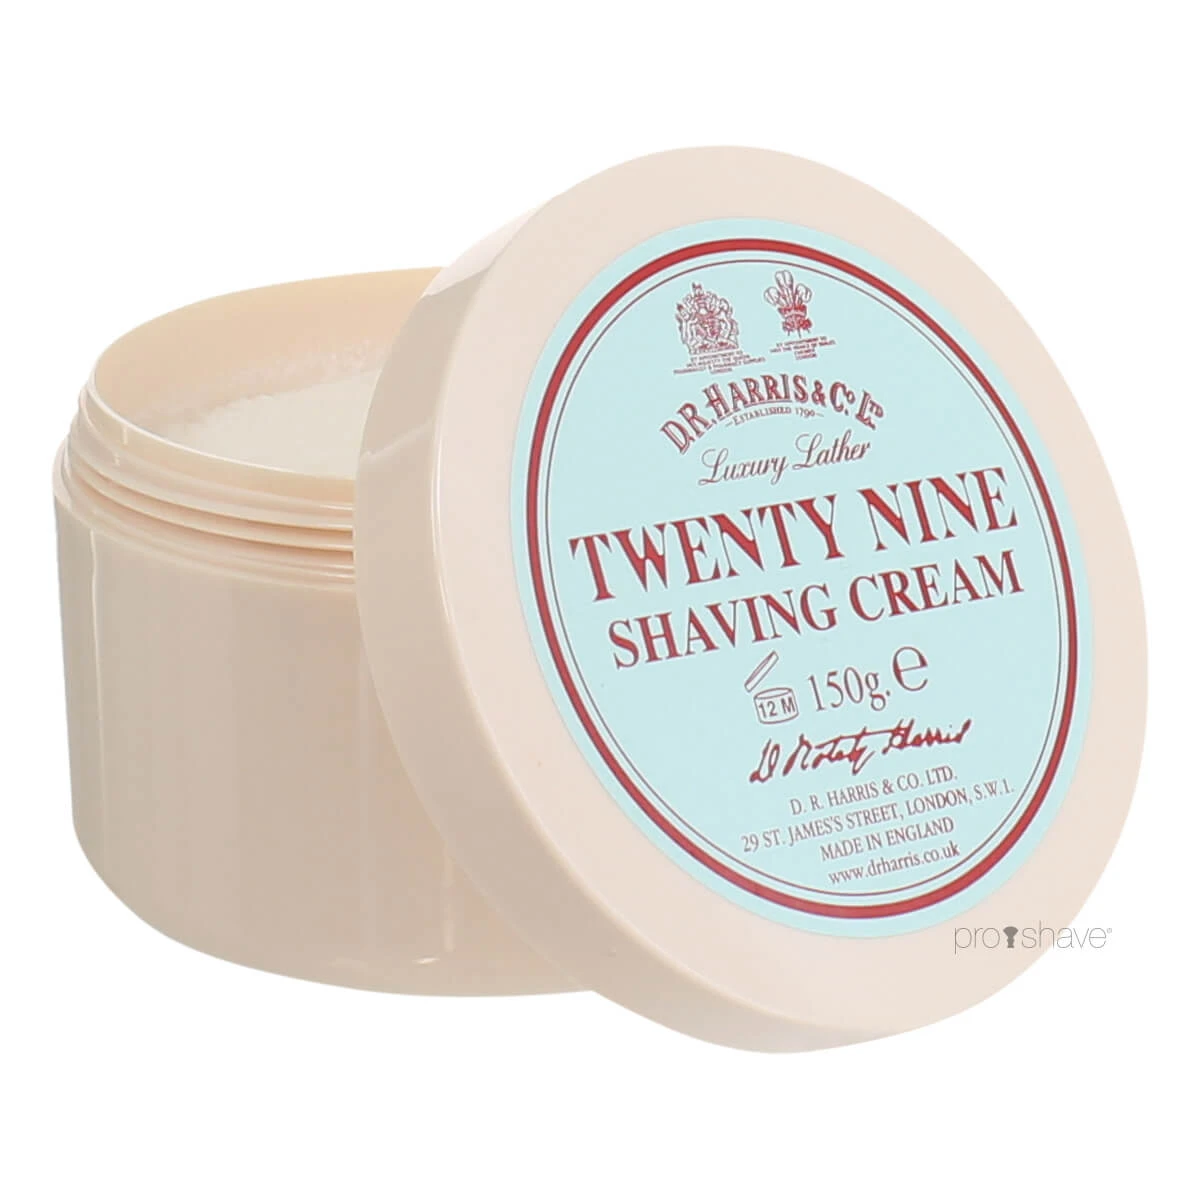 Shaving Creams | Find your shaving cream in DK's best selection